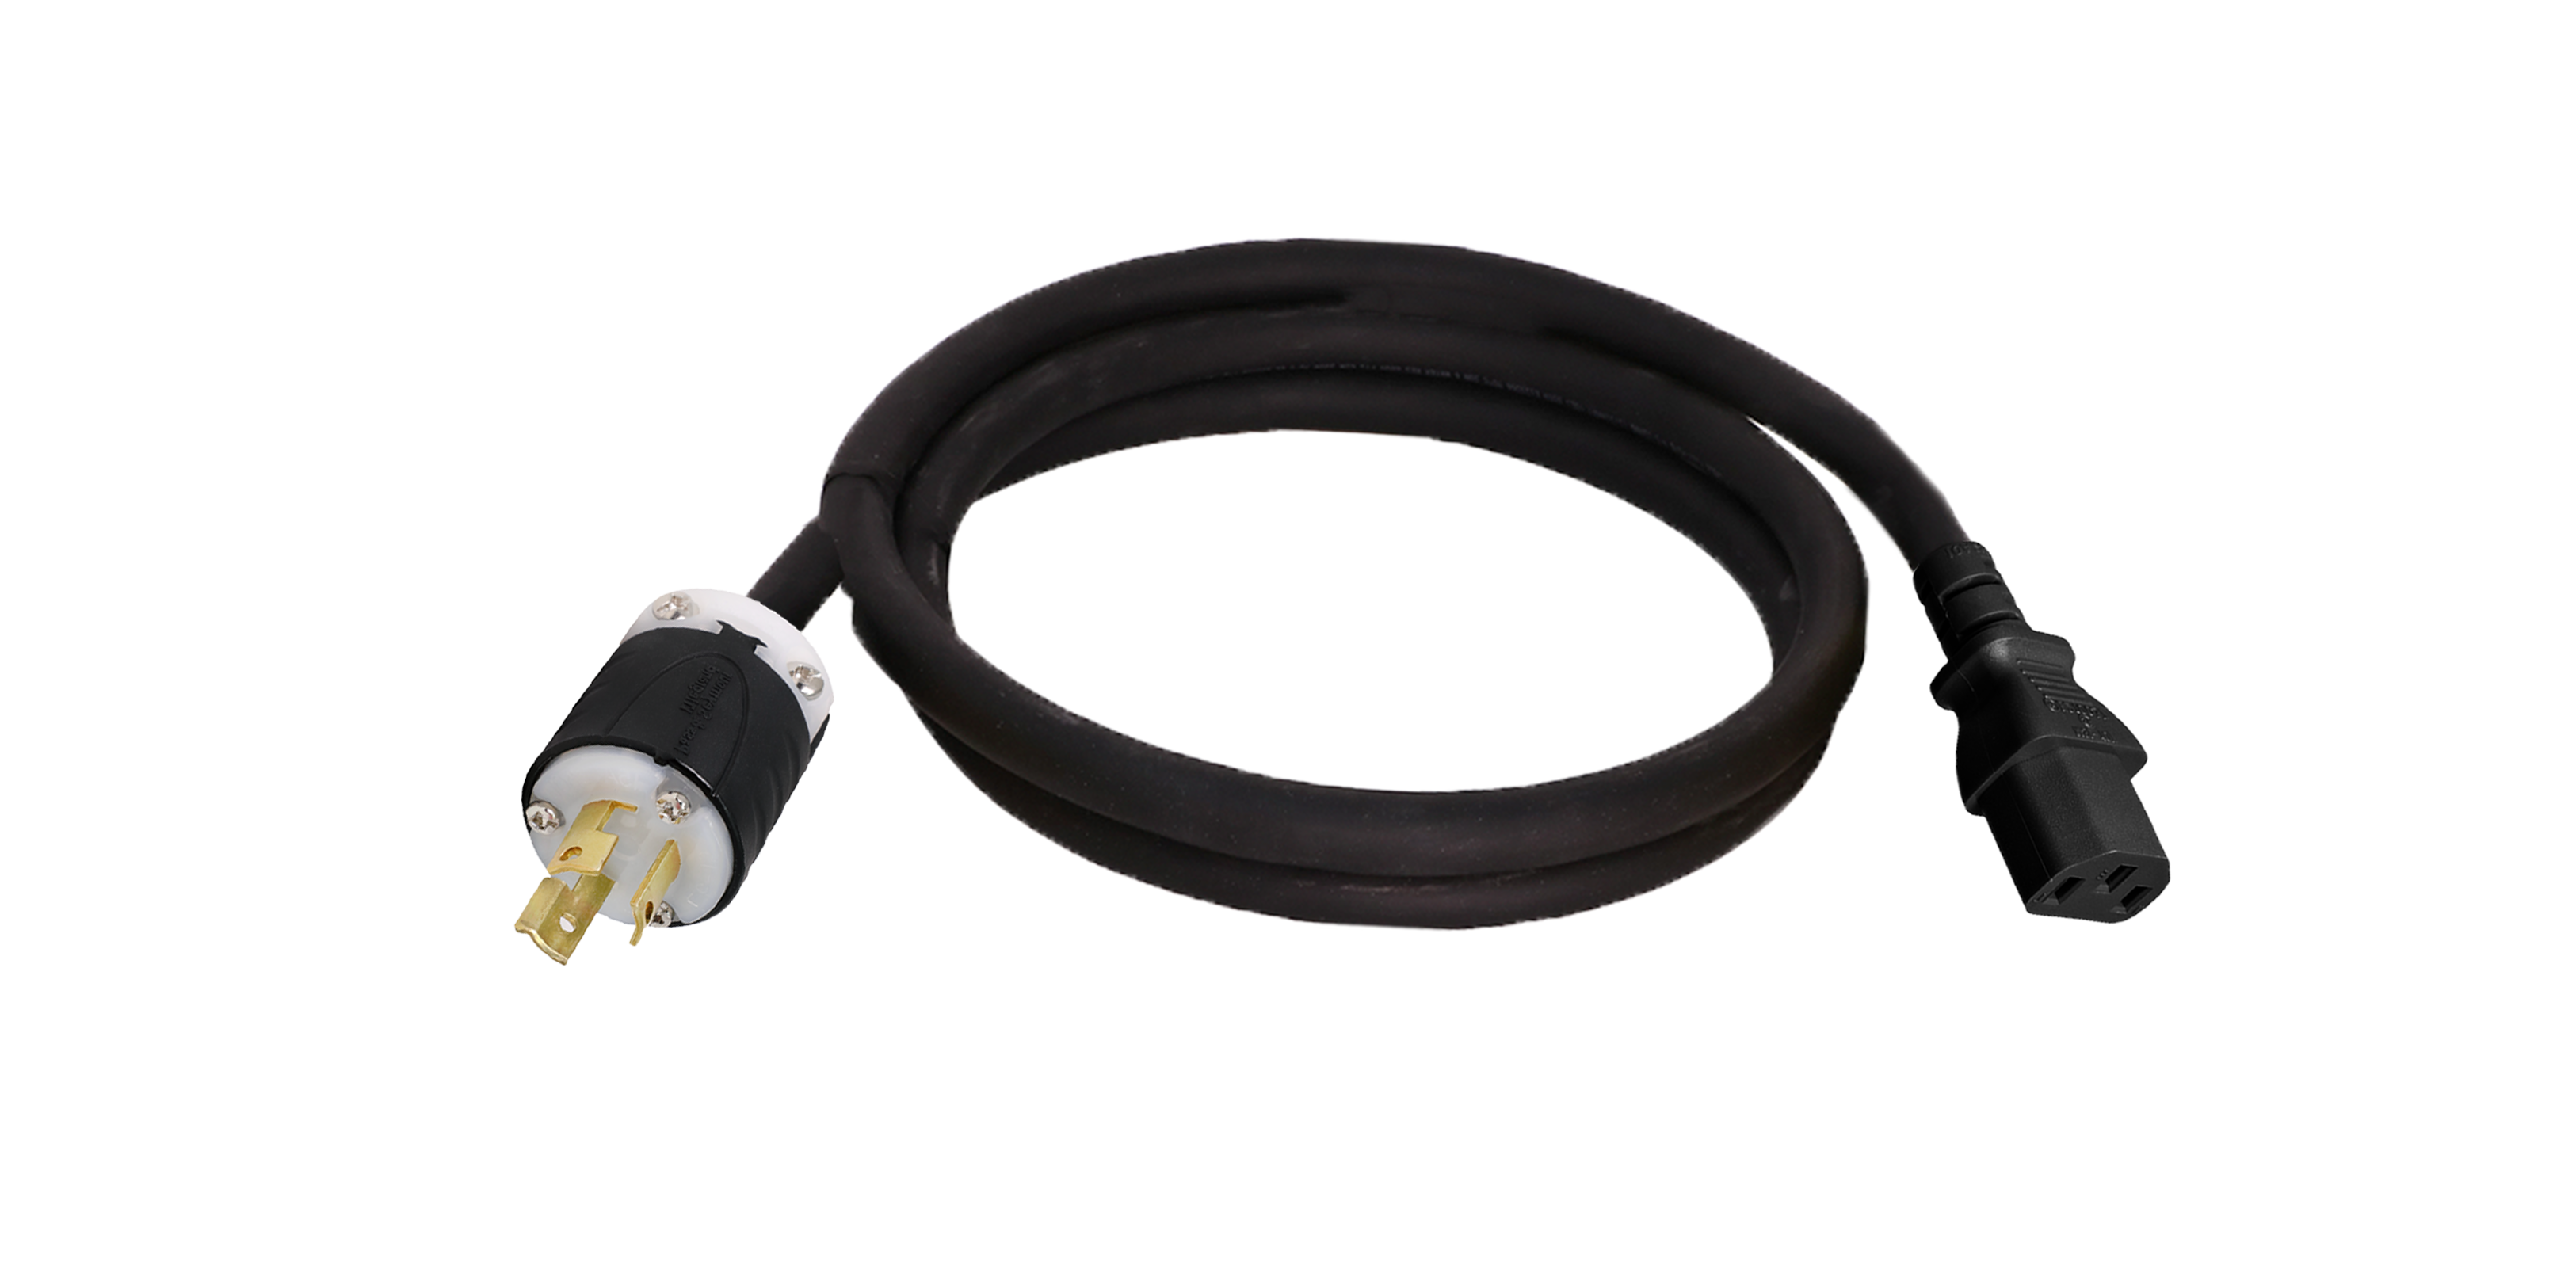 l6-15 to c13 power cable